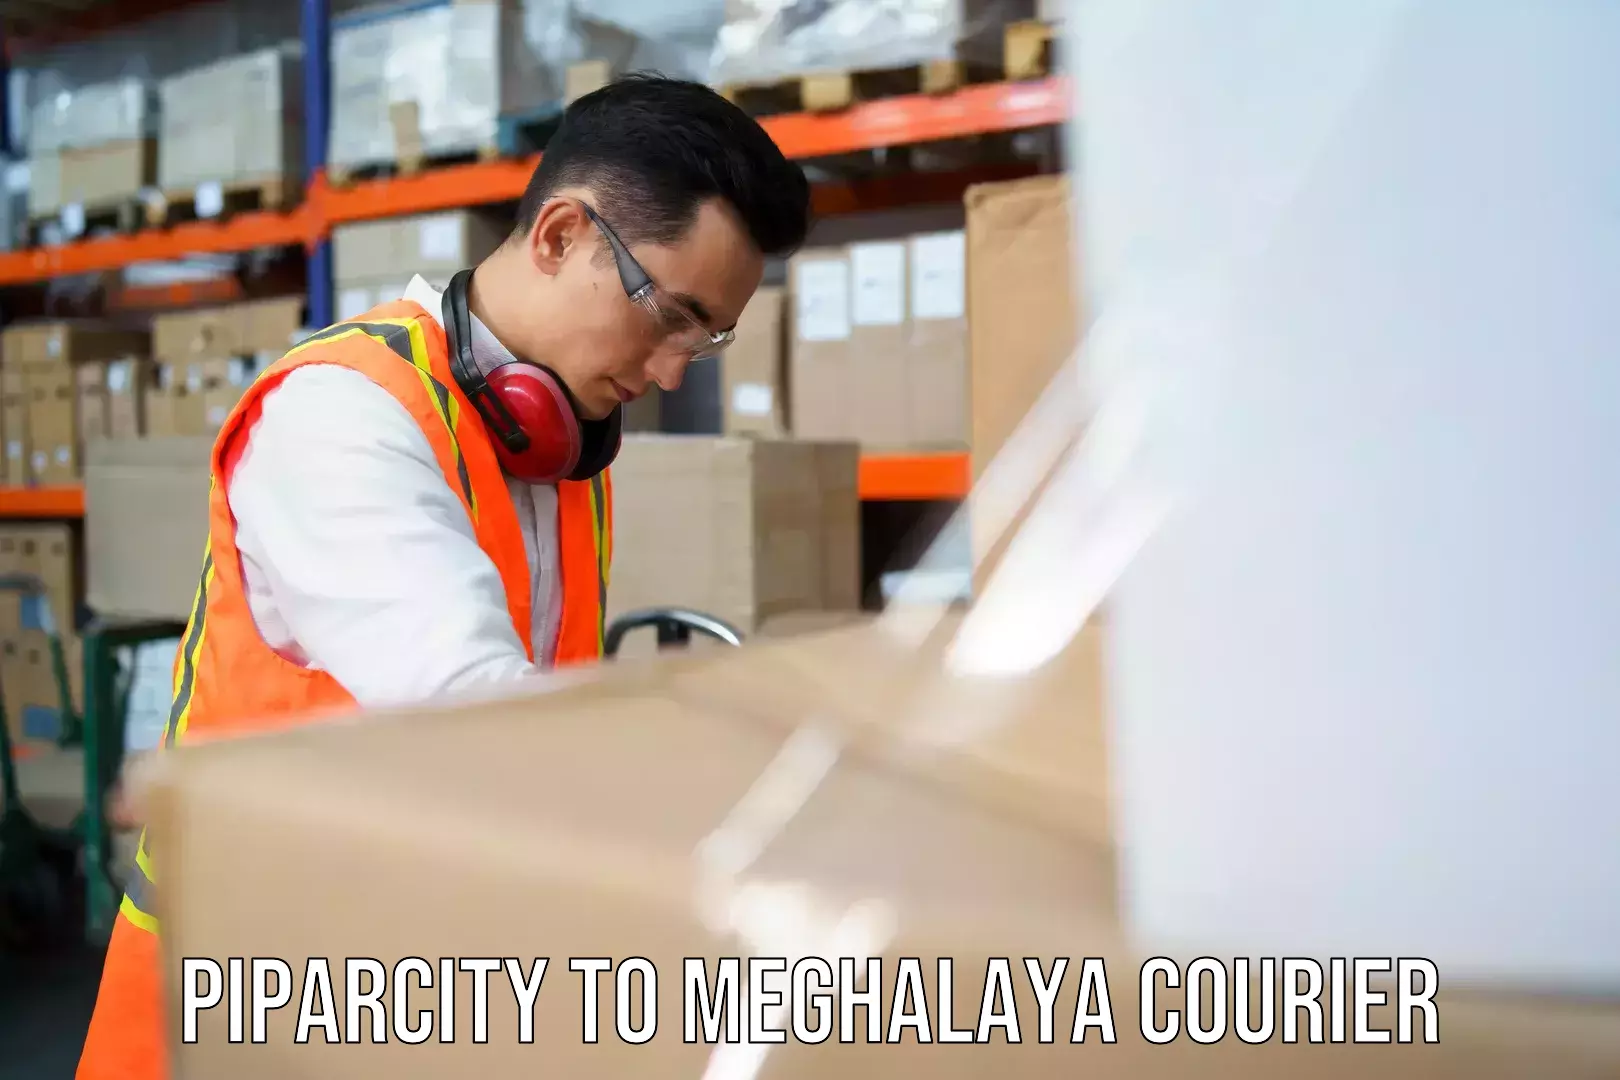 Specialized shipment handling Piparcity to Meghalaya